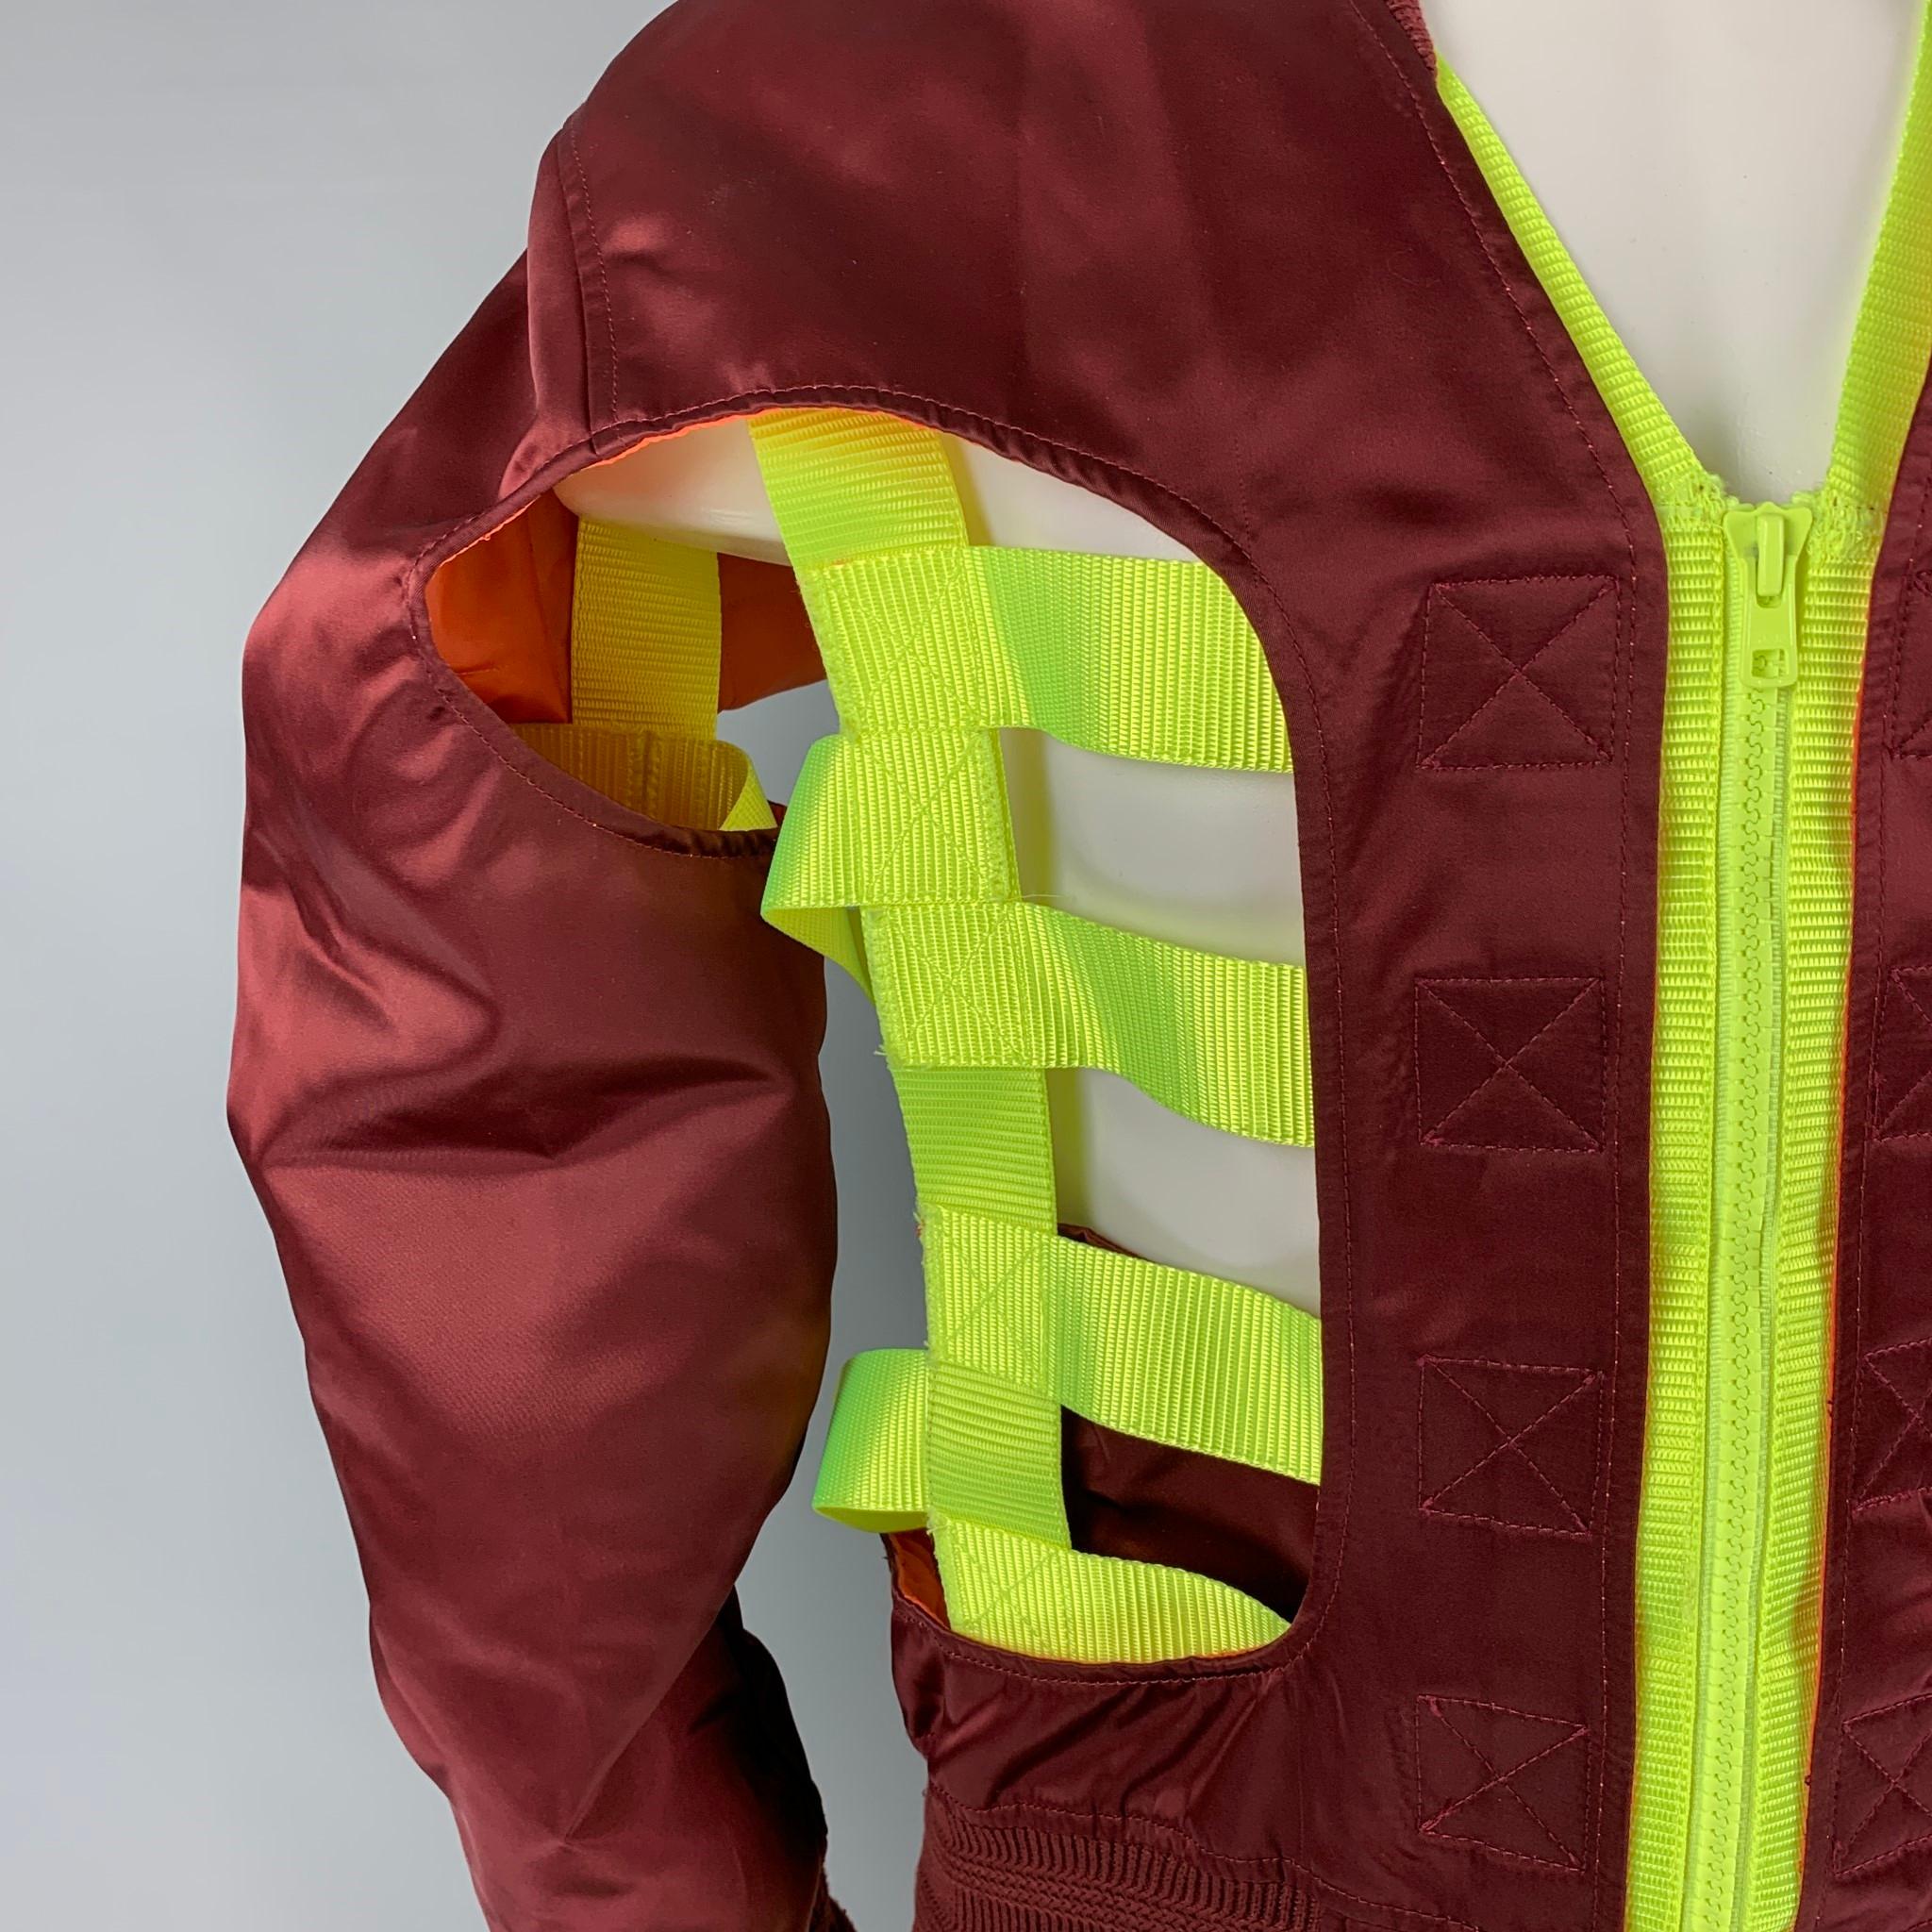 WALTER VAN BEIRENDONCK SS 19 'Wild is The Wind Collection' Skeleton Bomber jacket comes in a burgundy polyester featuring a regular fit, neon cut out 